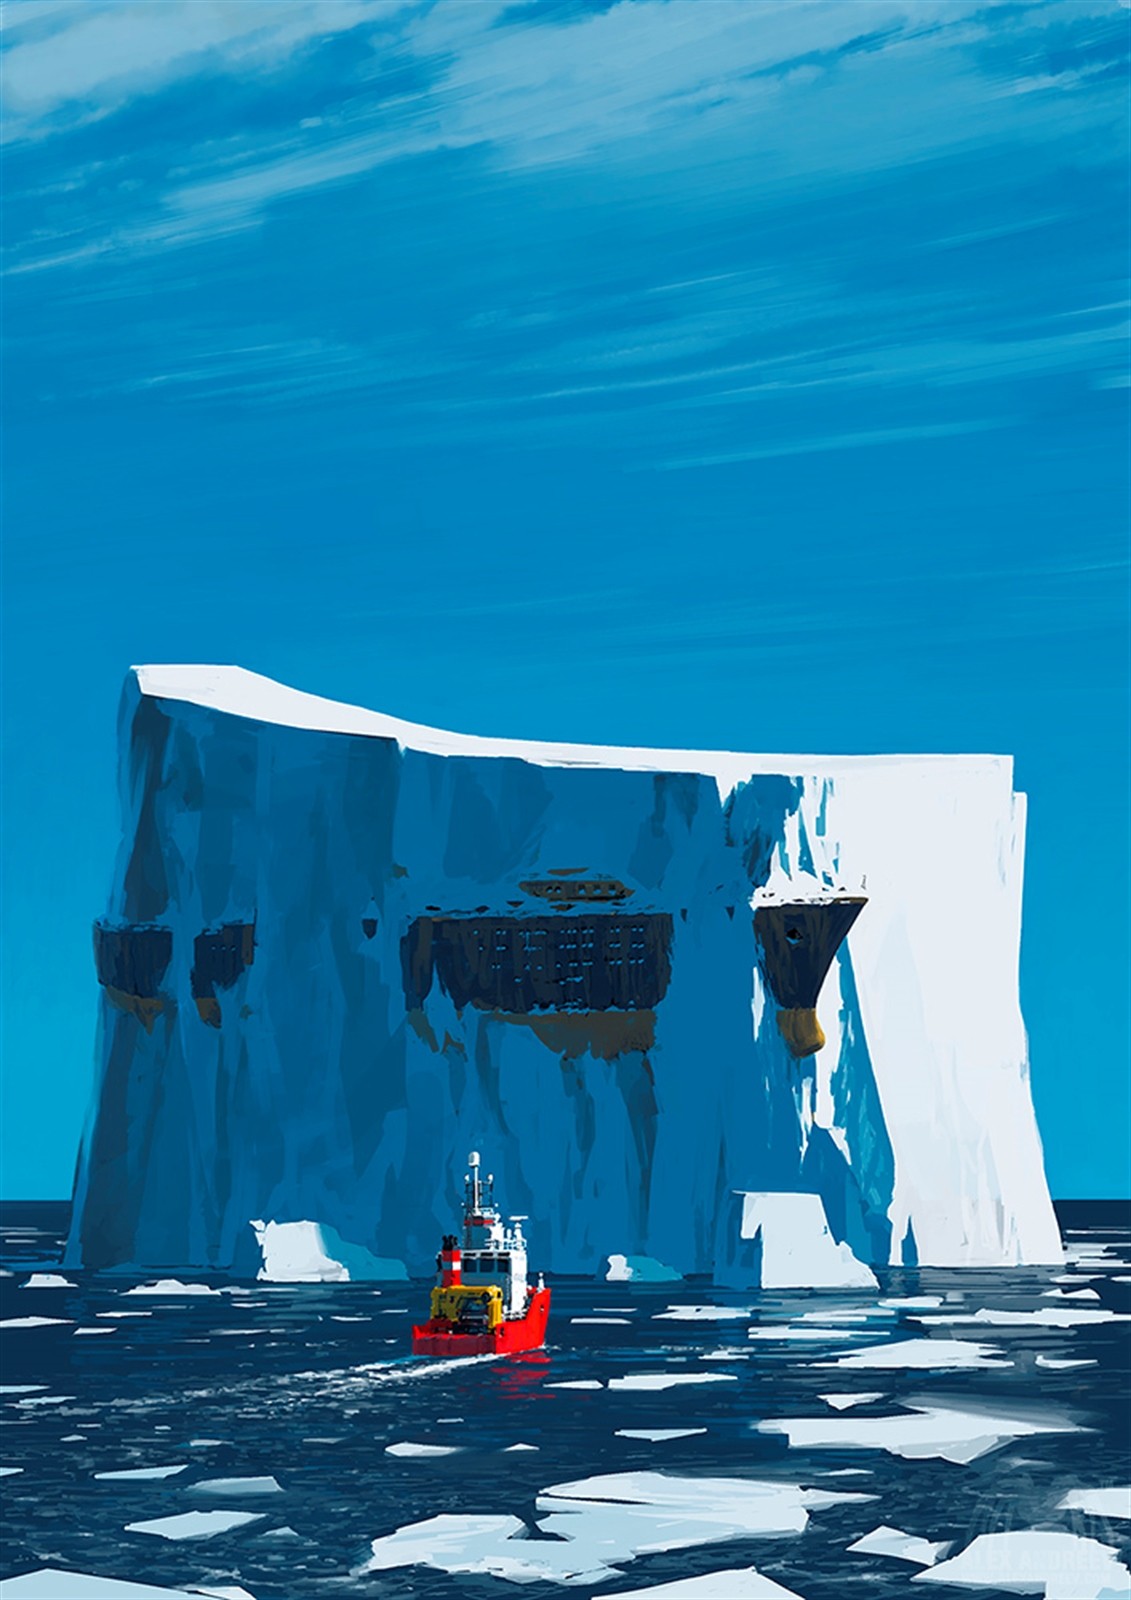 Surreal Artwork Concept Art H P Lovecraft Alexey Andreev Portrait Display Ship Iceberg Sea Water Ice 1131x1600